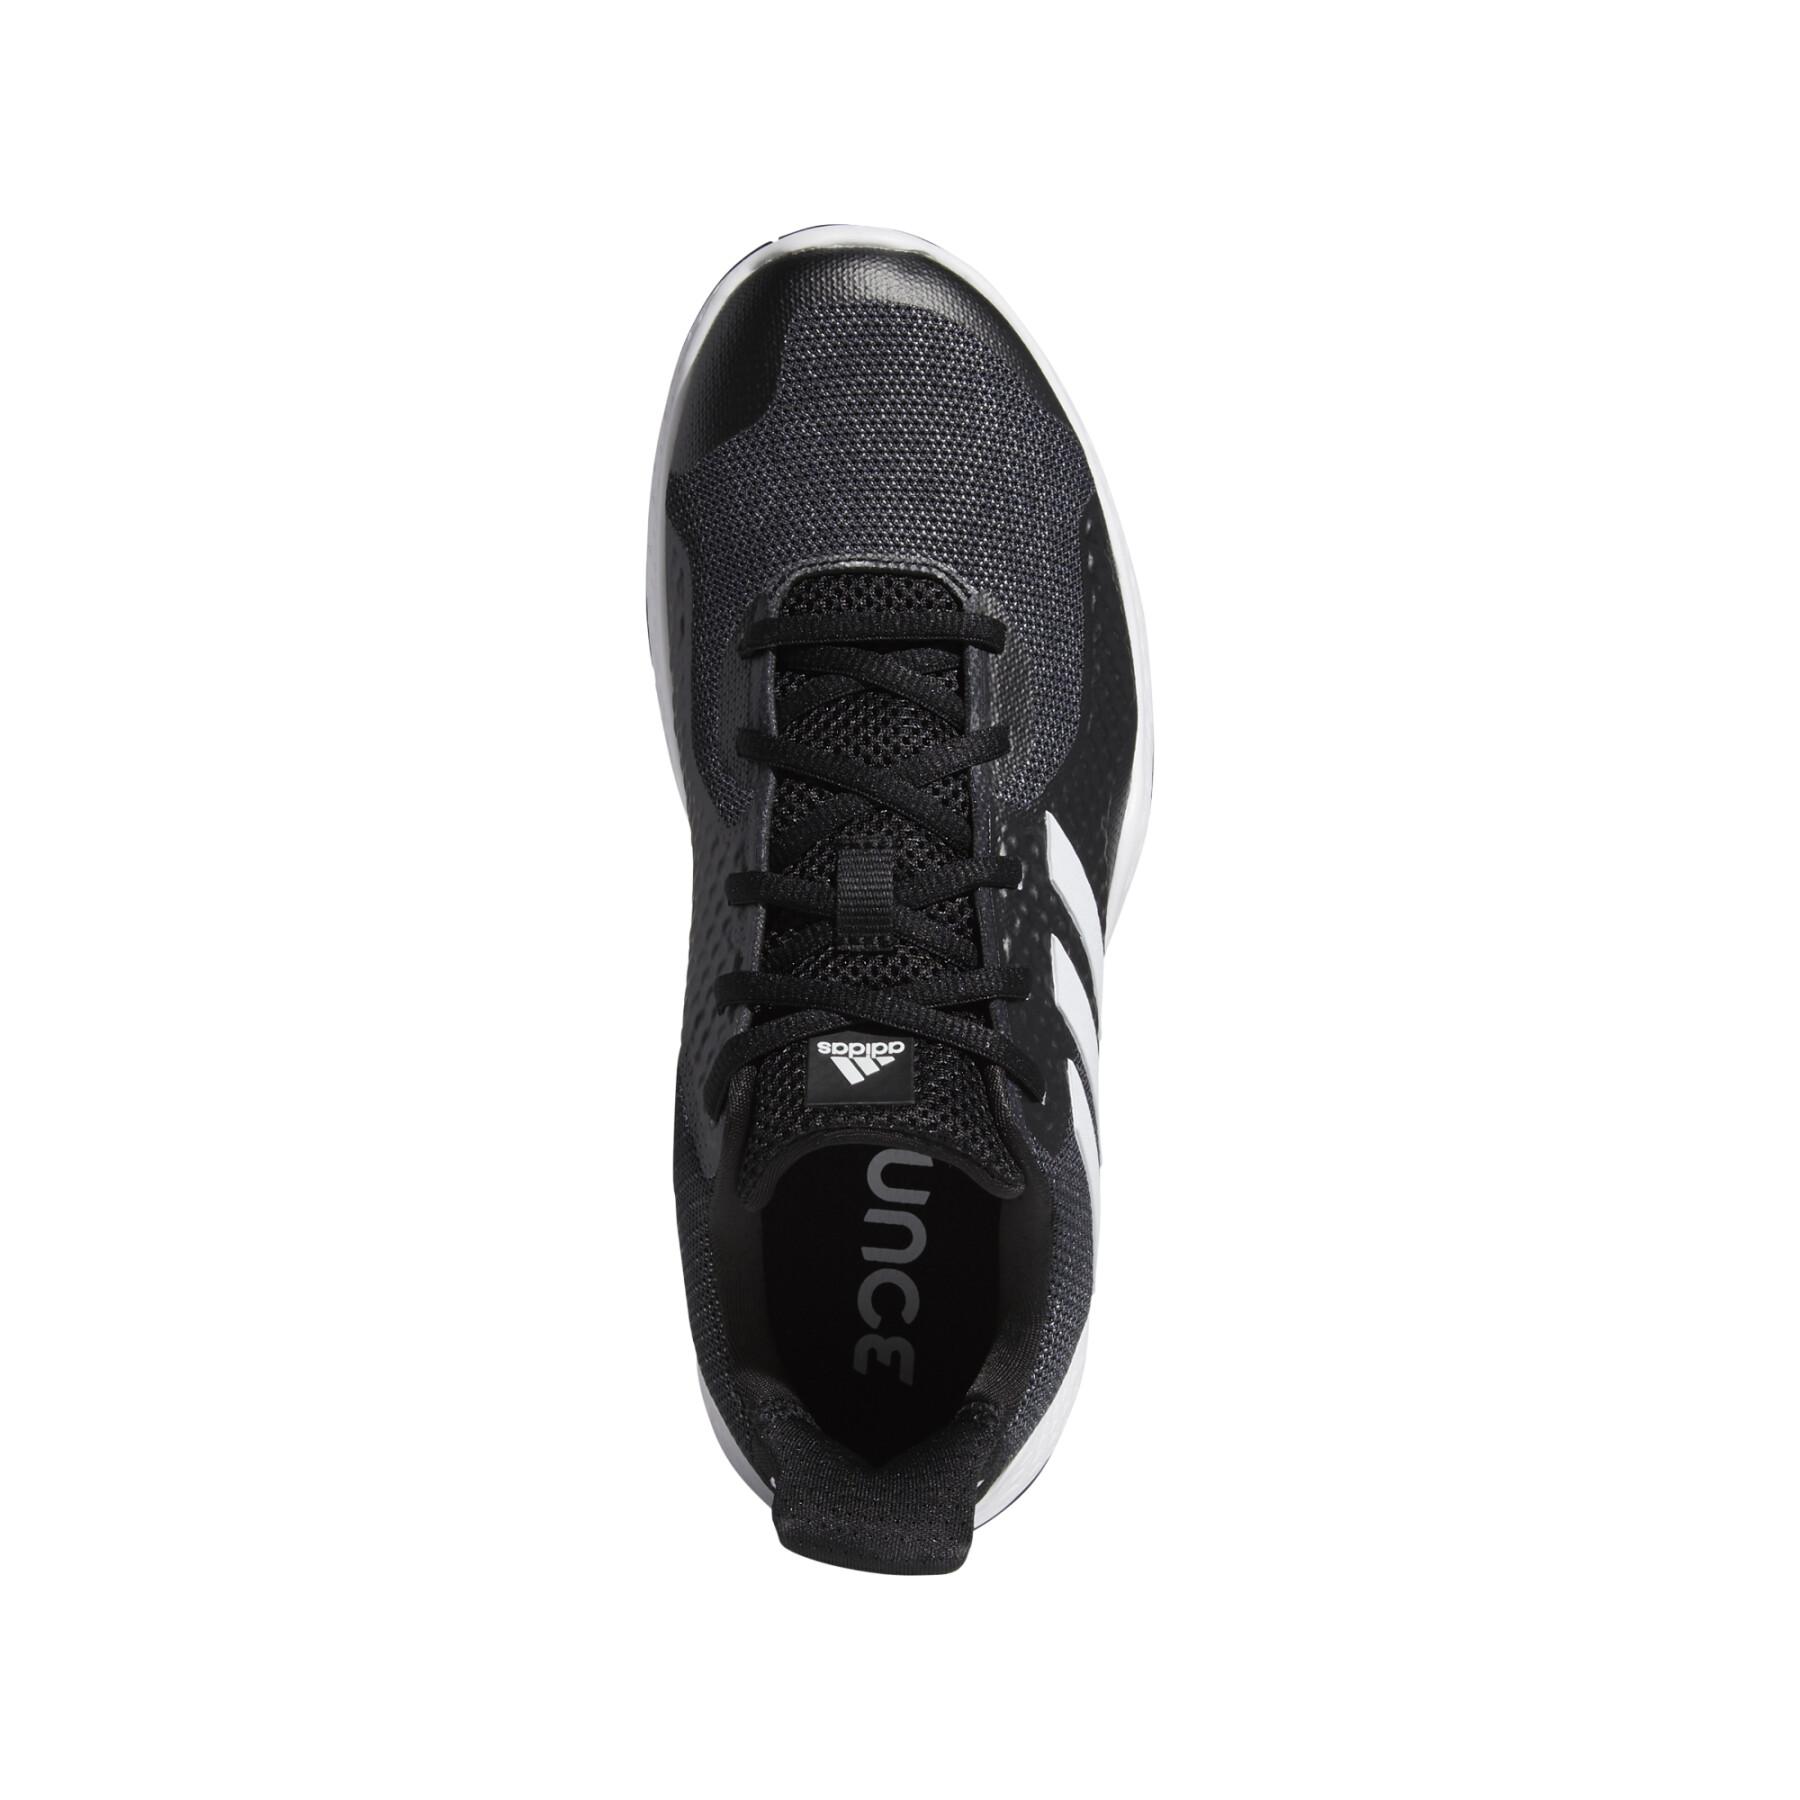 Zapatos de mujer adidas FitBounce Trainers